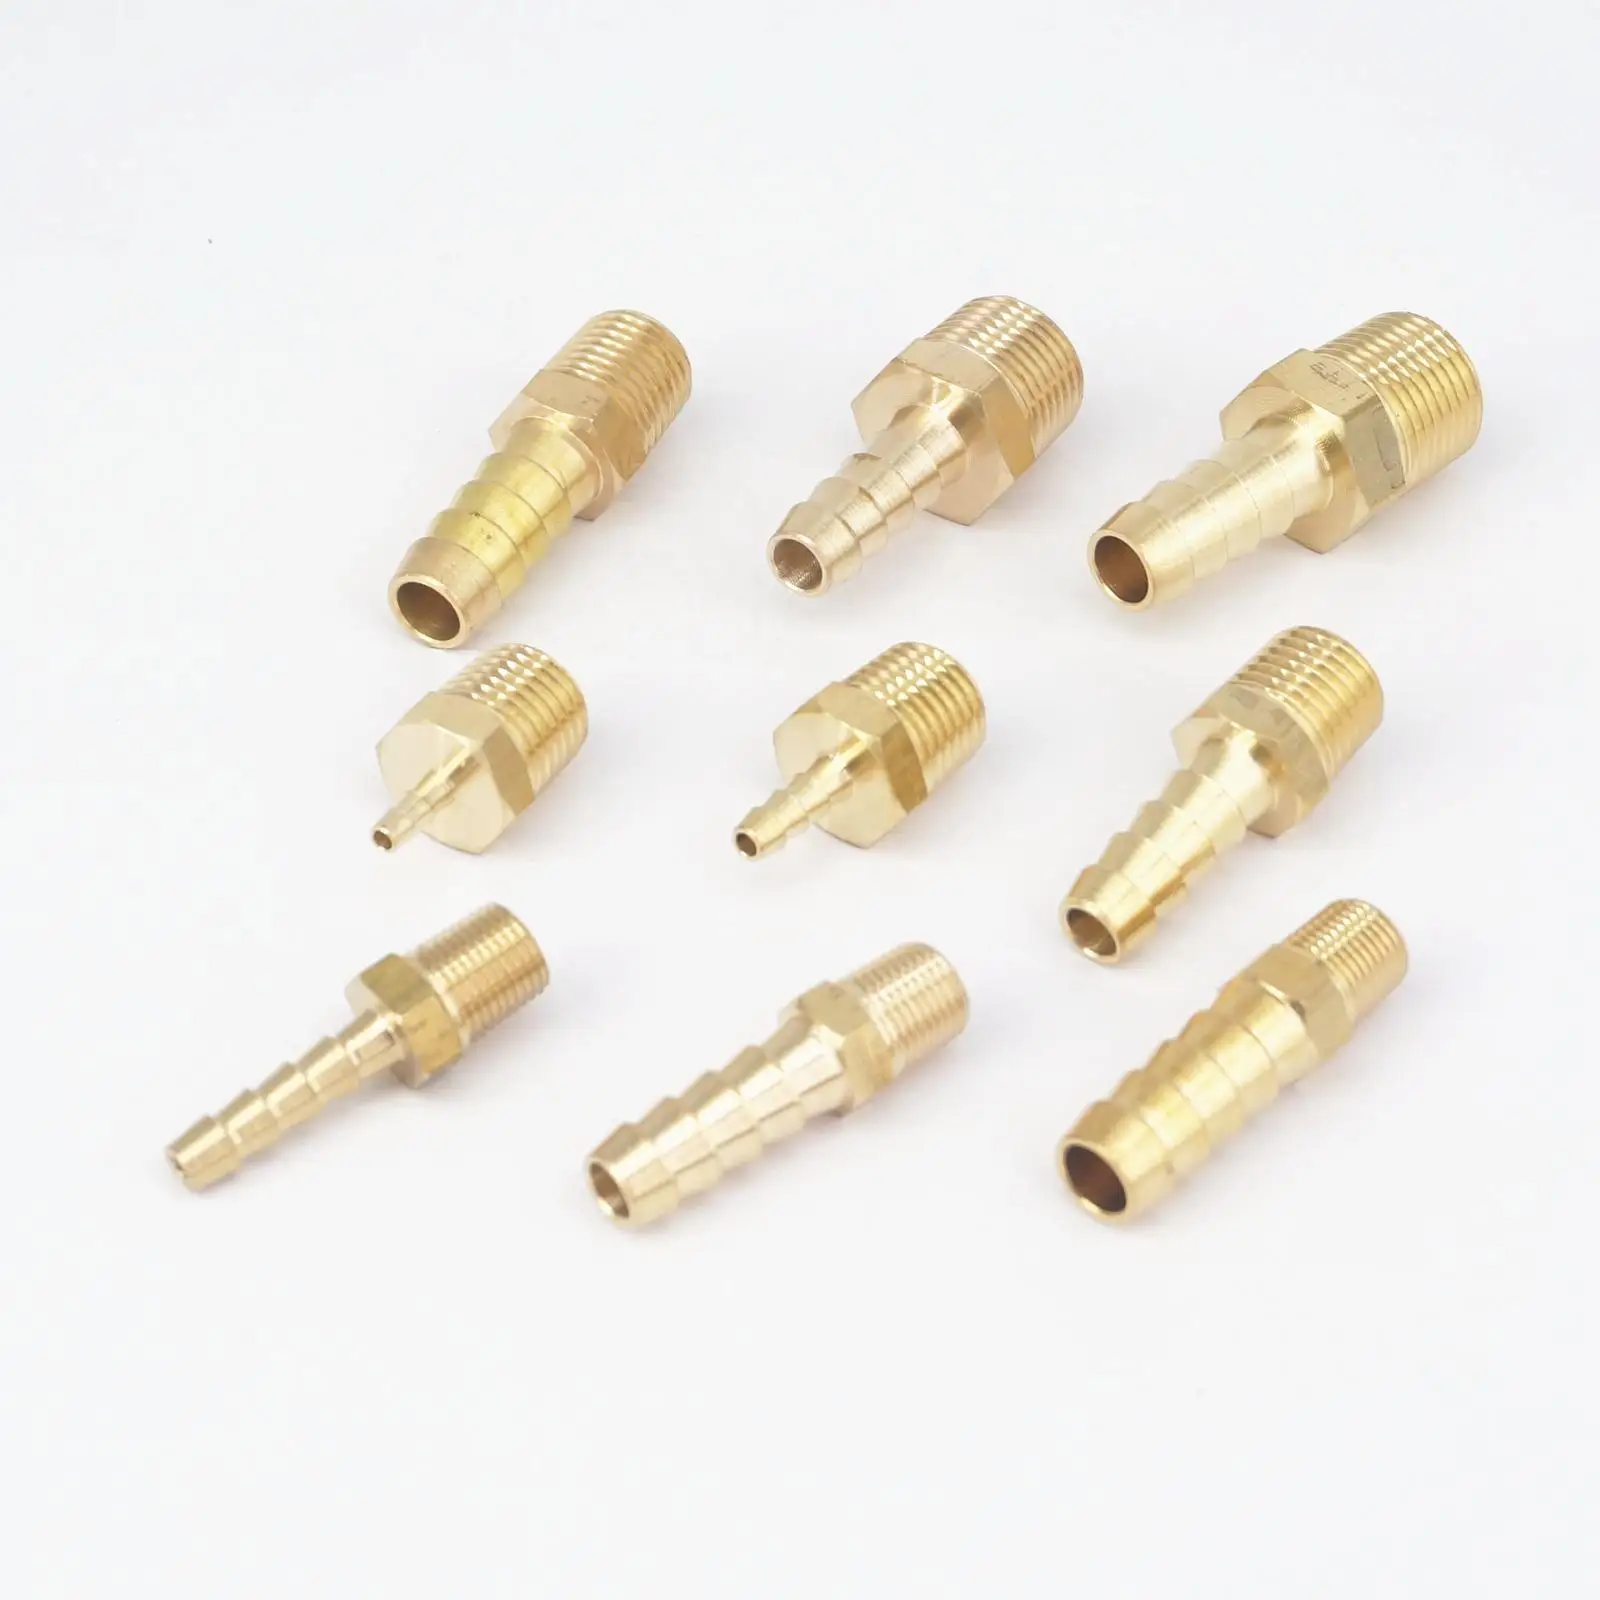 BRASS Barbed Hose Fitting For 1//8/" Hose ID x 1//8 MPT